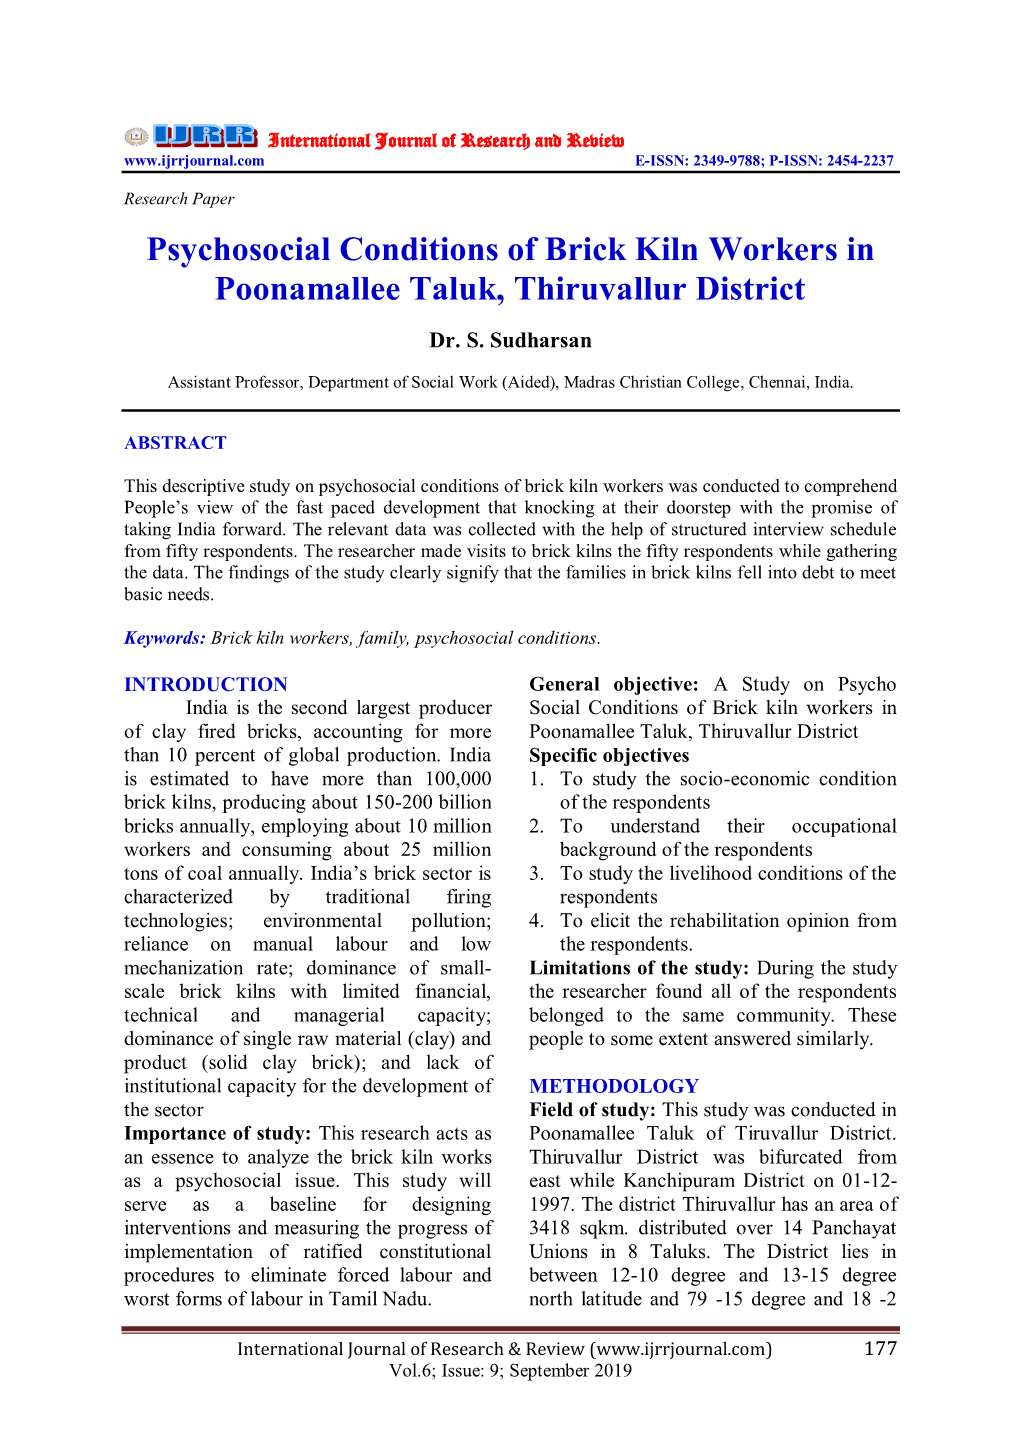 Psychosocial Conditions of Brick Kiln Workers in Poonamallee Taluk, Thiruvallur District